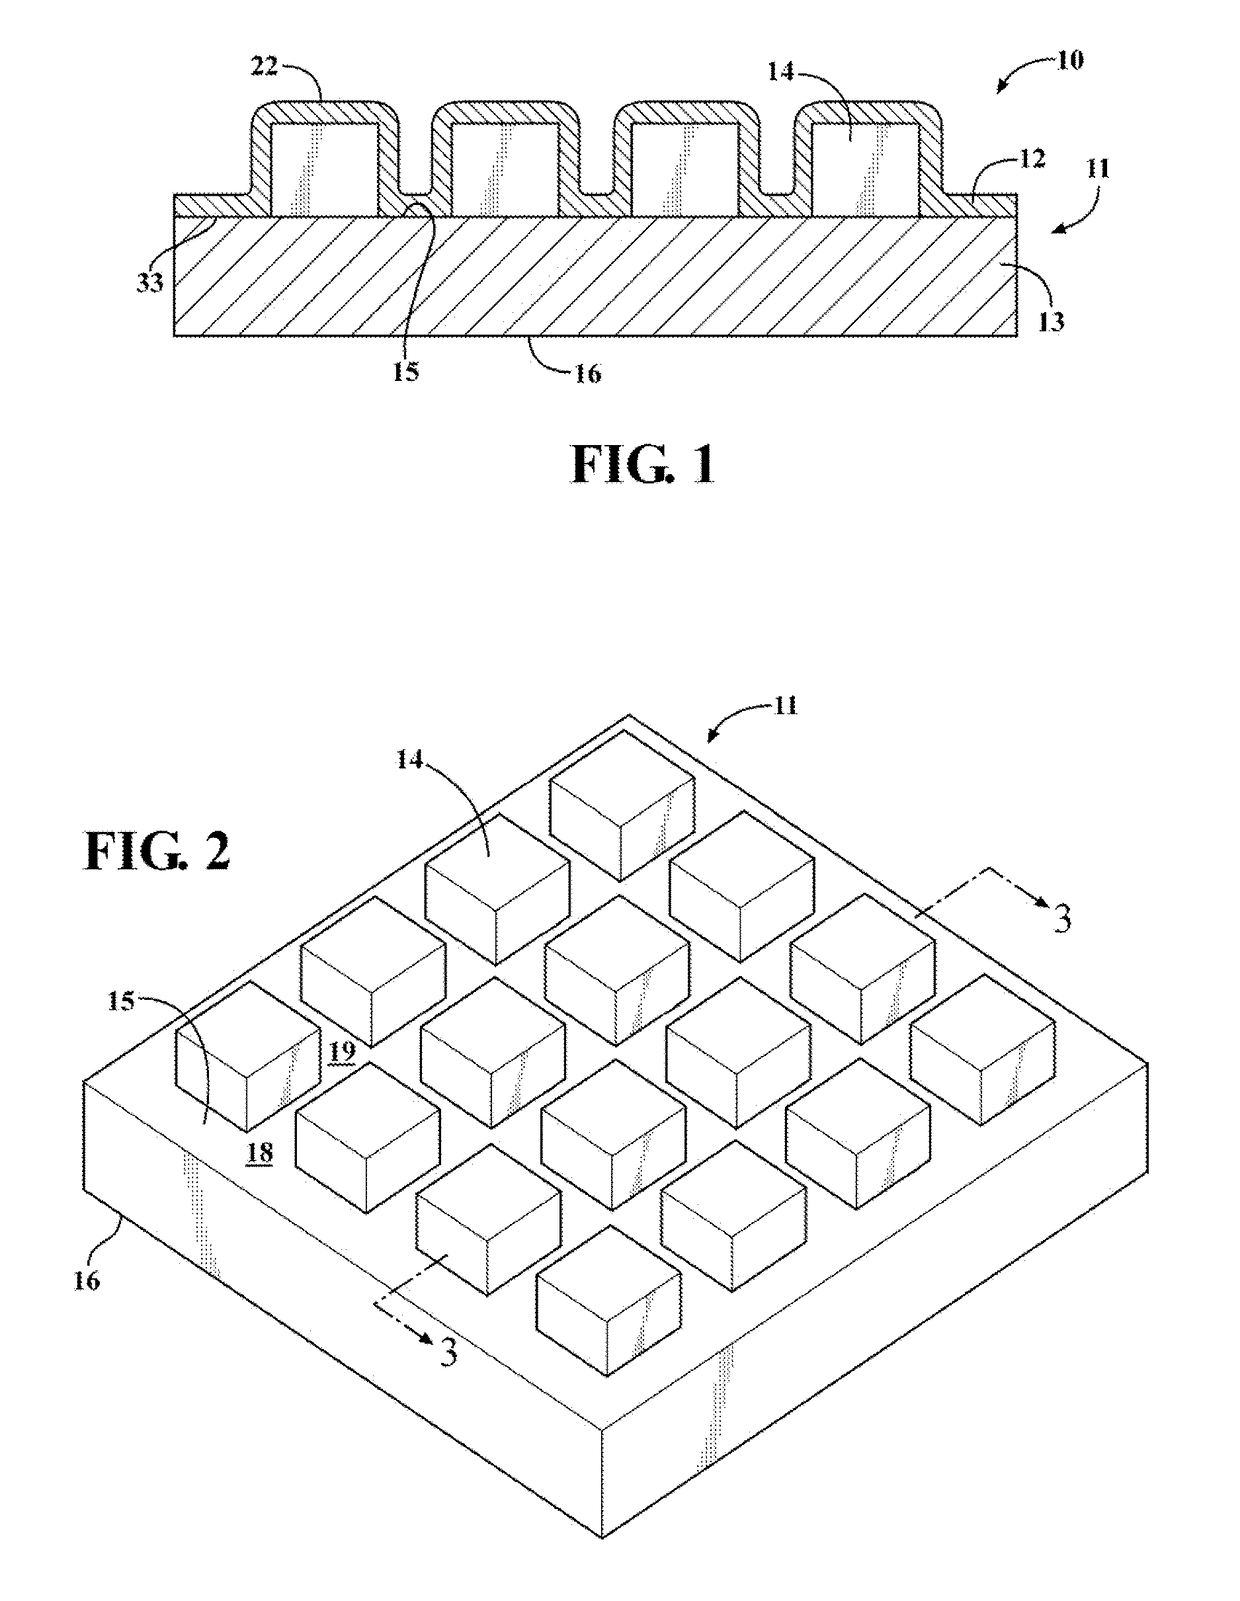 Vacuum lamination method for forming a conformally coated article and associated conformally coated articles formed therefrom